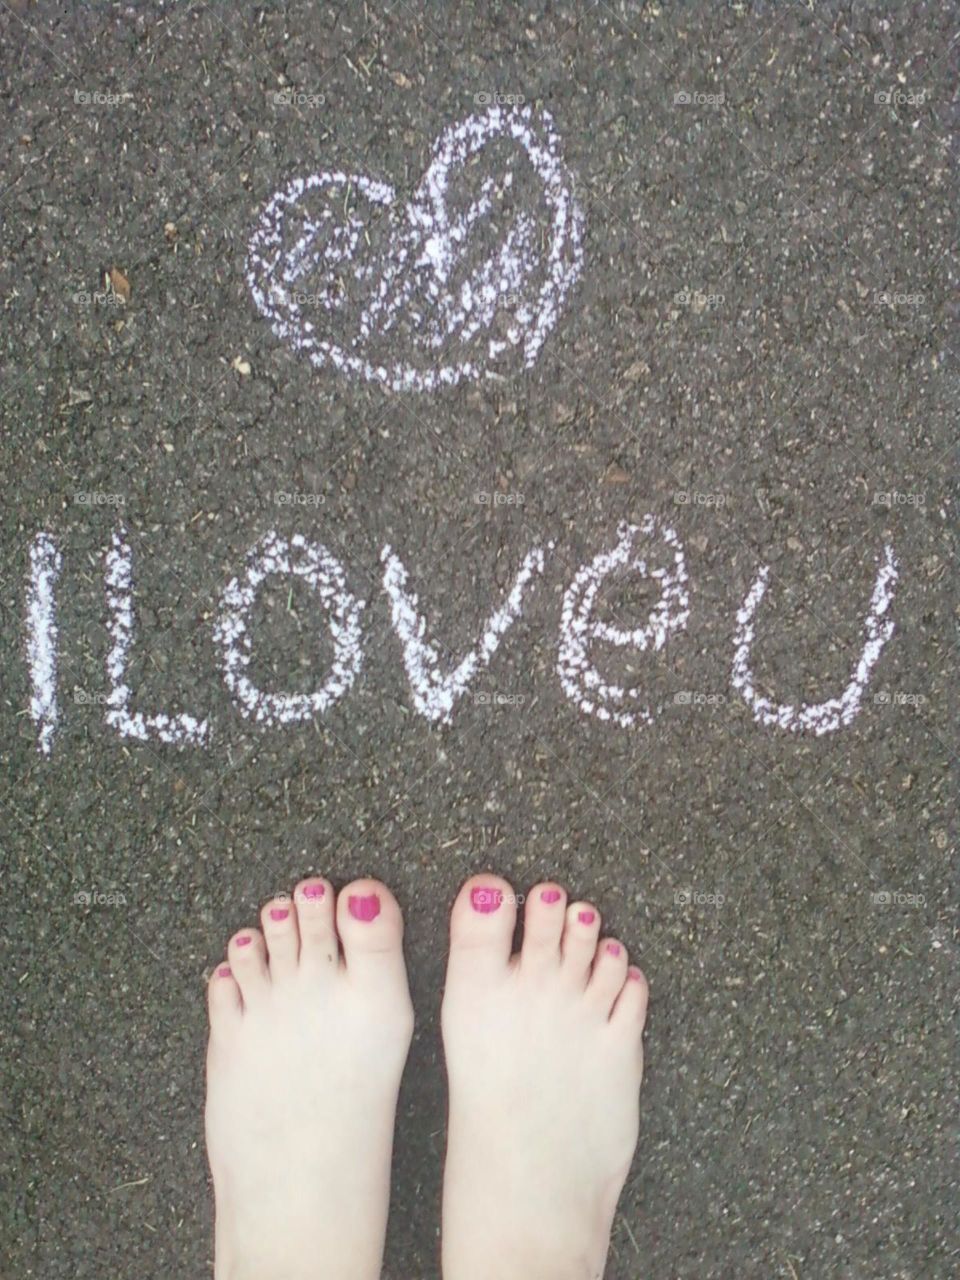 Crude but interesting photo delivering a message of love on a sidewalk drawn with chalk, simple and free.